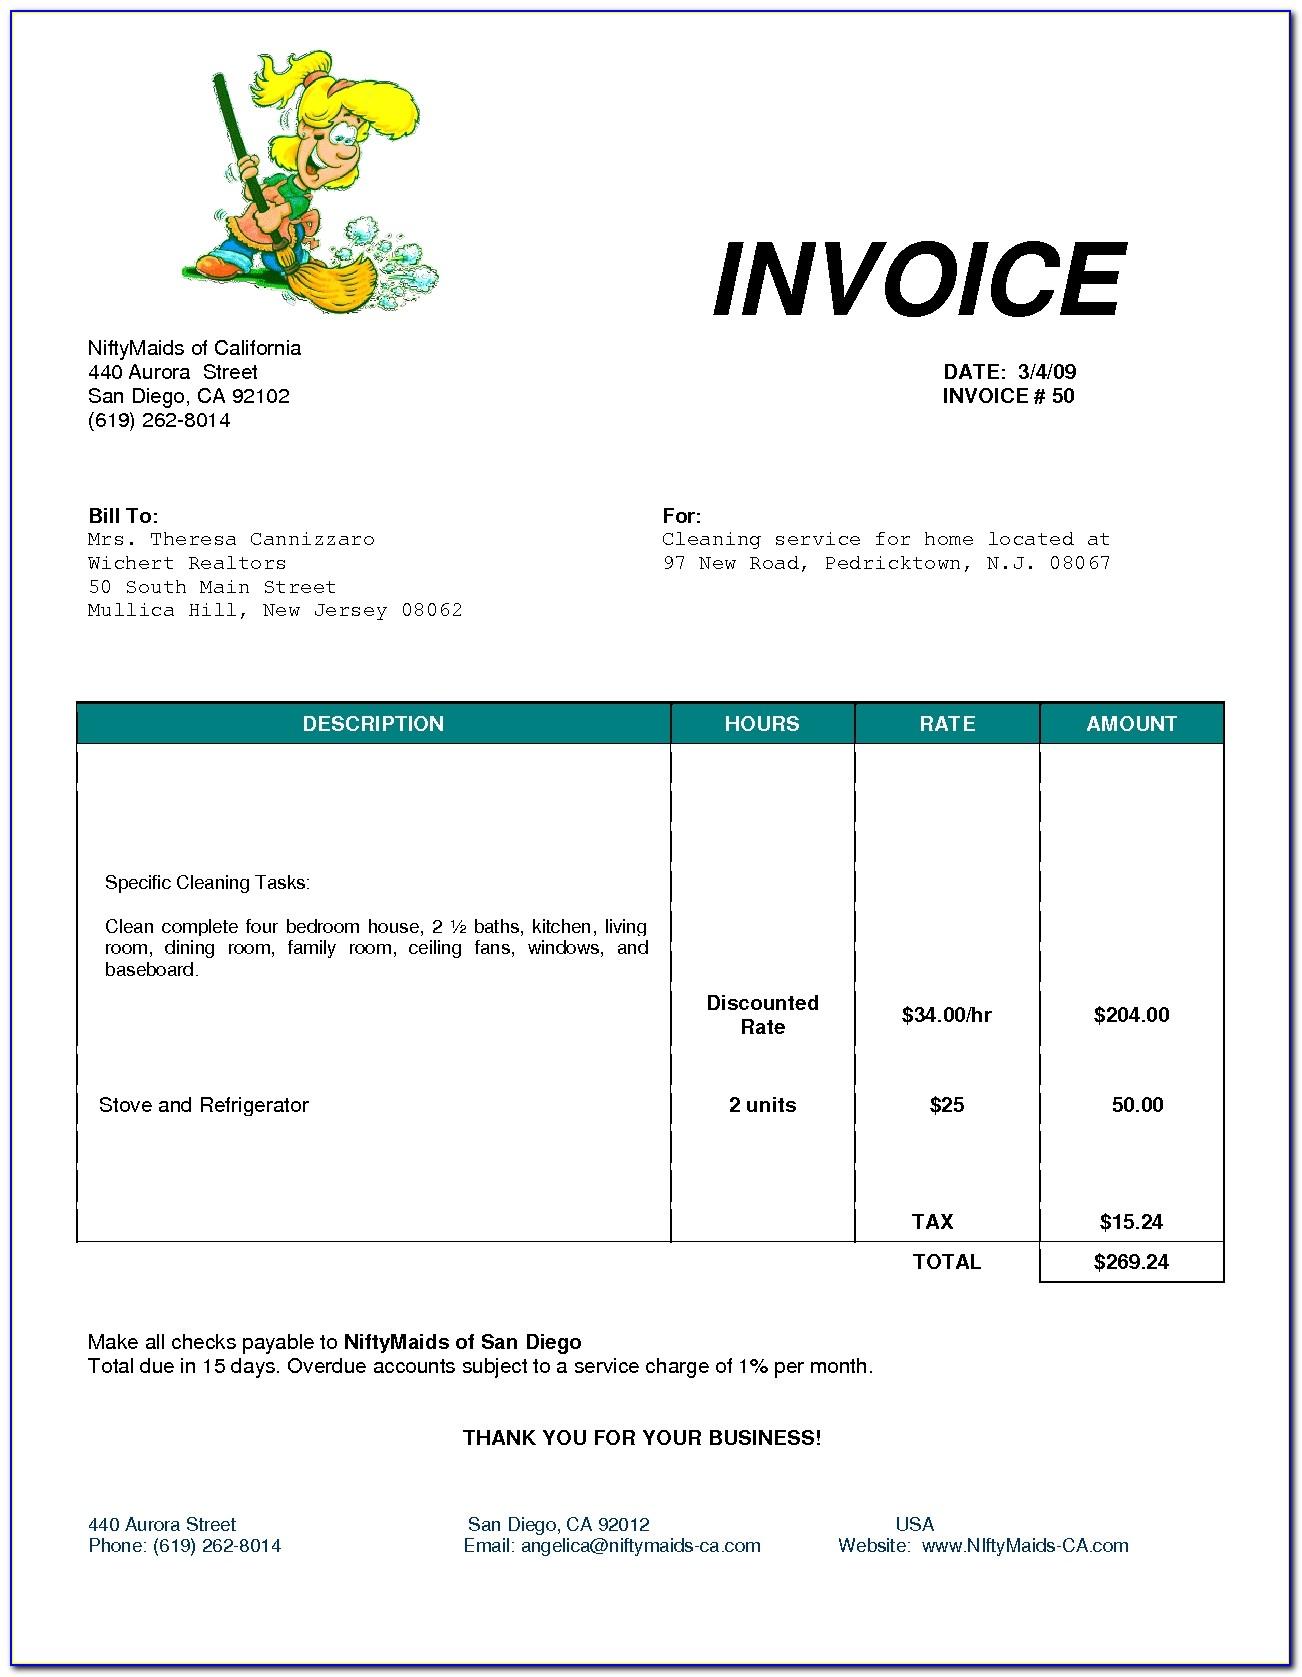 Sample Invoice For House Cleaning Services